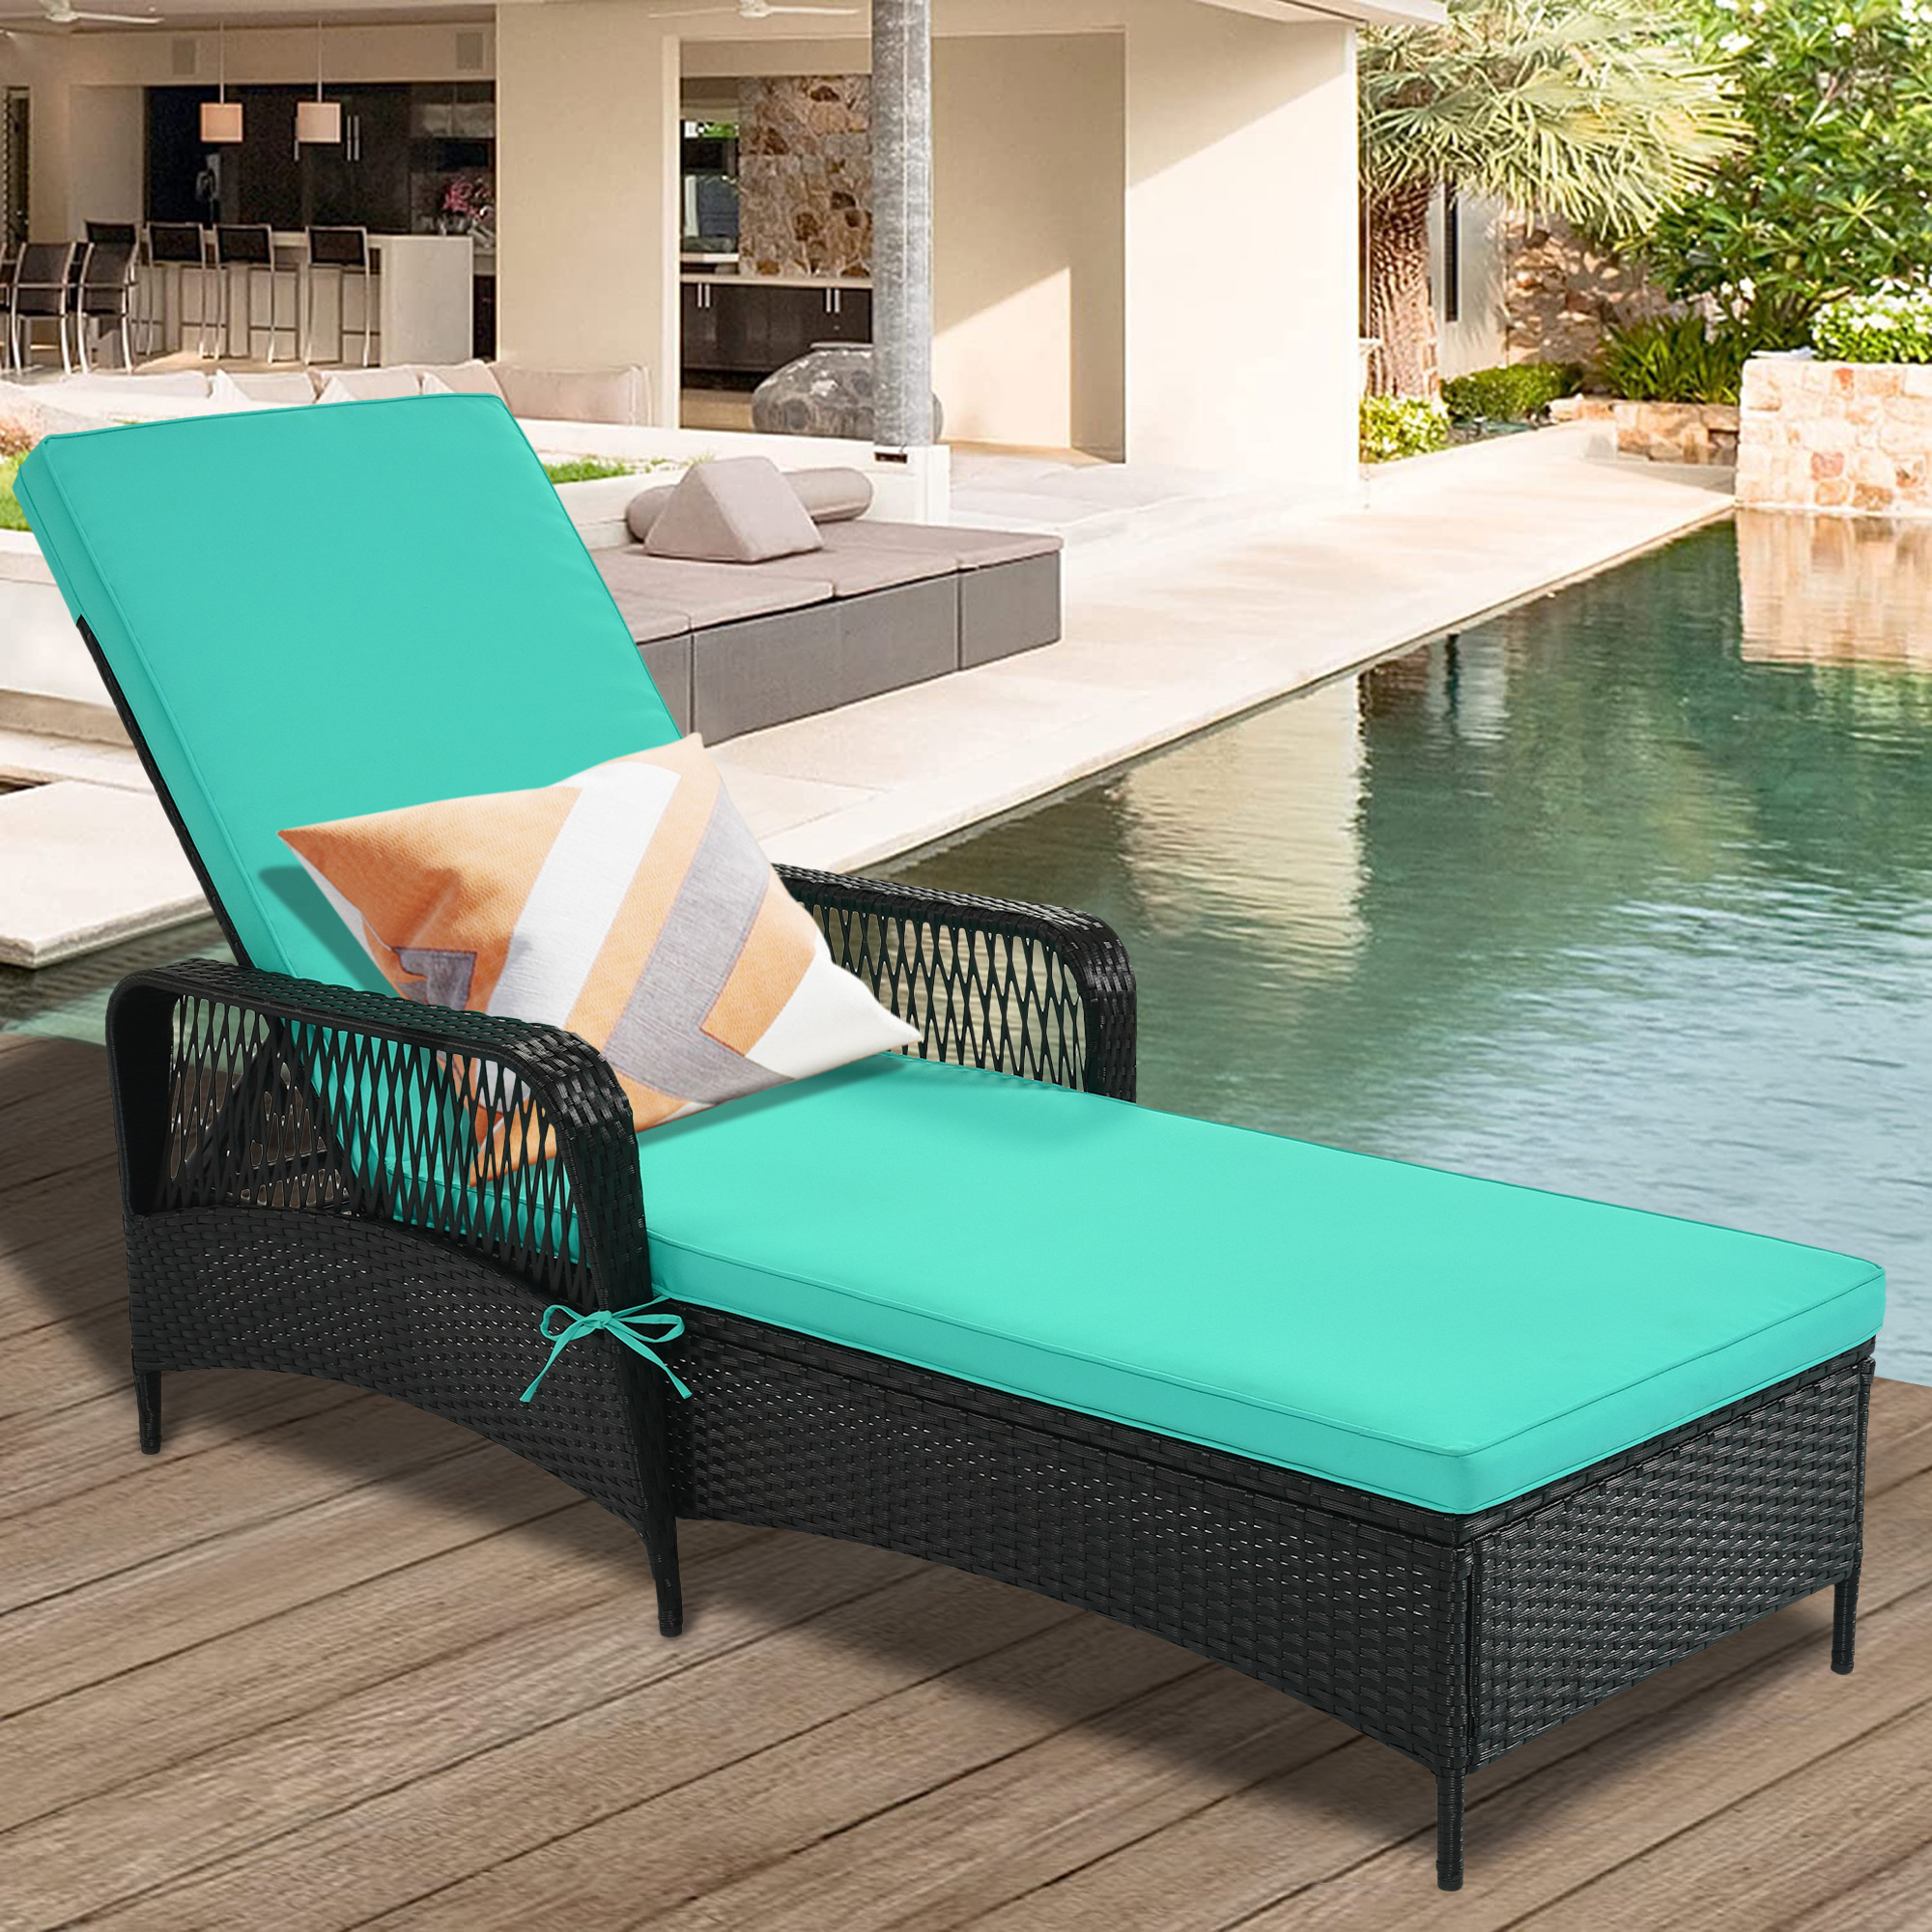 SYNGAR Patio Lounge Chair, Patio Chaise Lounges with Thickened Cushion, PE Rattan Steel Frame Pool Lounge Chair for Patio Backyard Porch Garden Poolside, Green - image 1 of 10